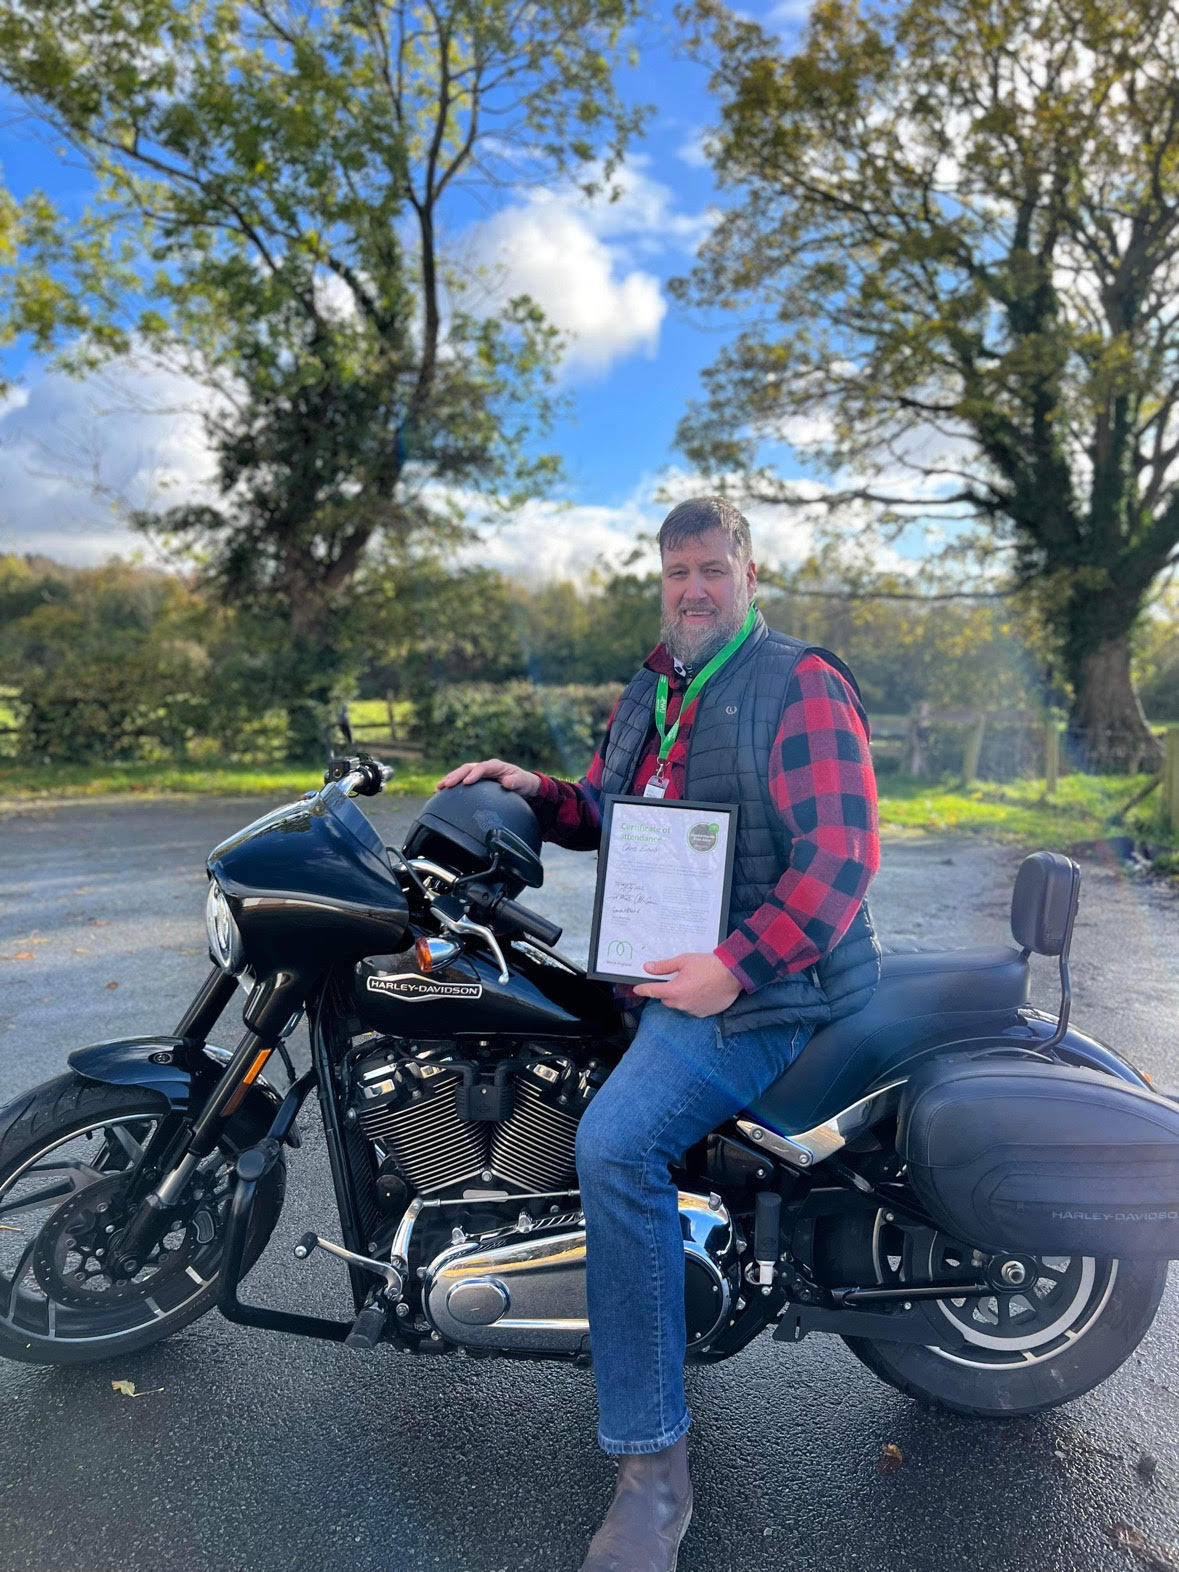 Chris, 47, has now made it his quest to help fight the stigma of mental health problems and plans to ride around North Wales, handing out mental health leaflets at popular bike haunts whilst encouraging people to talk. ..